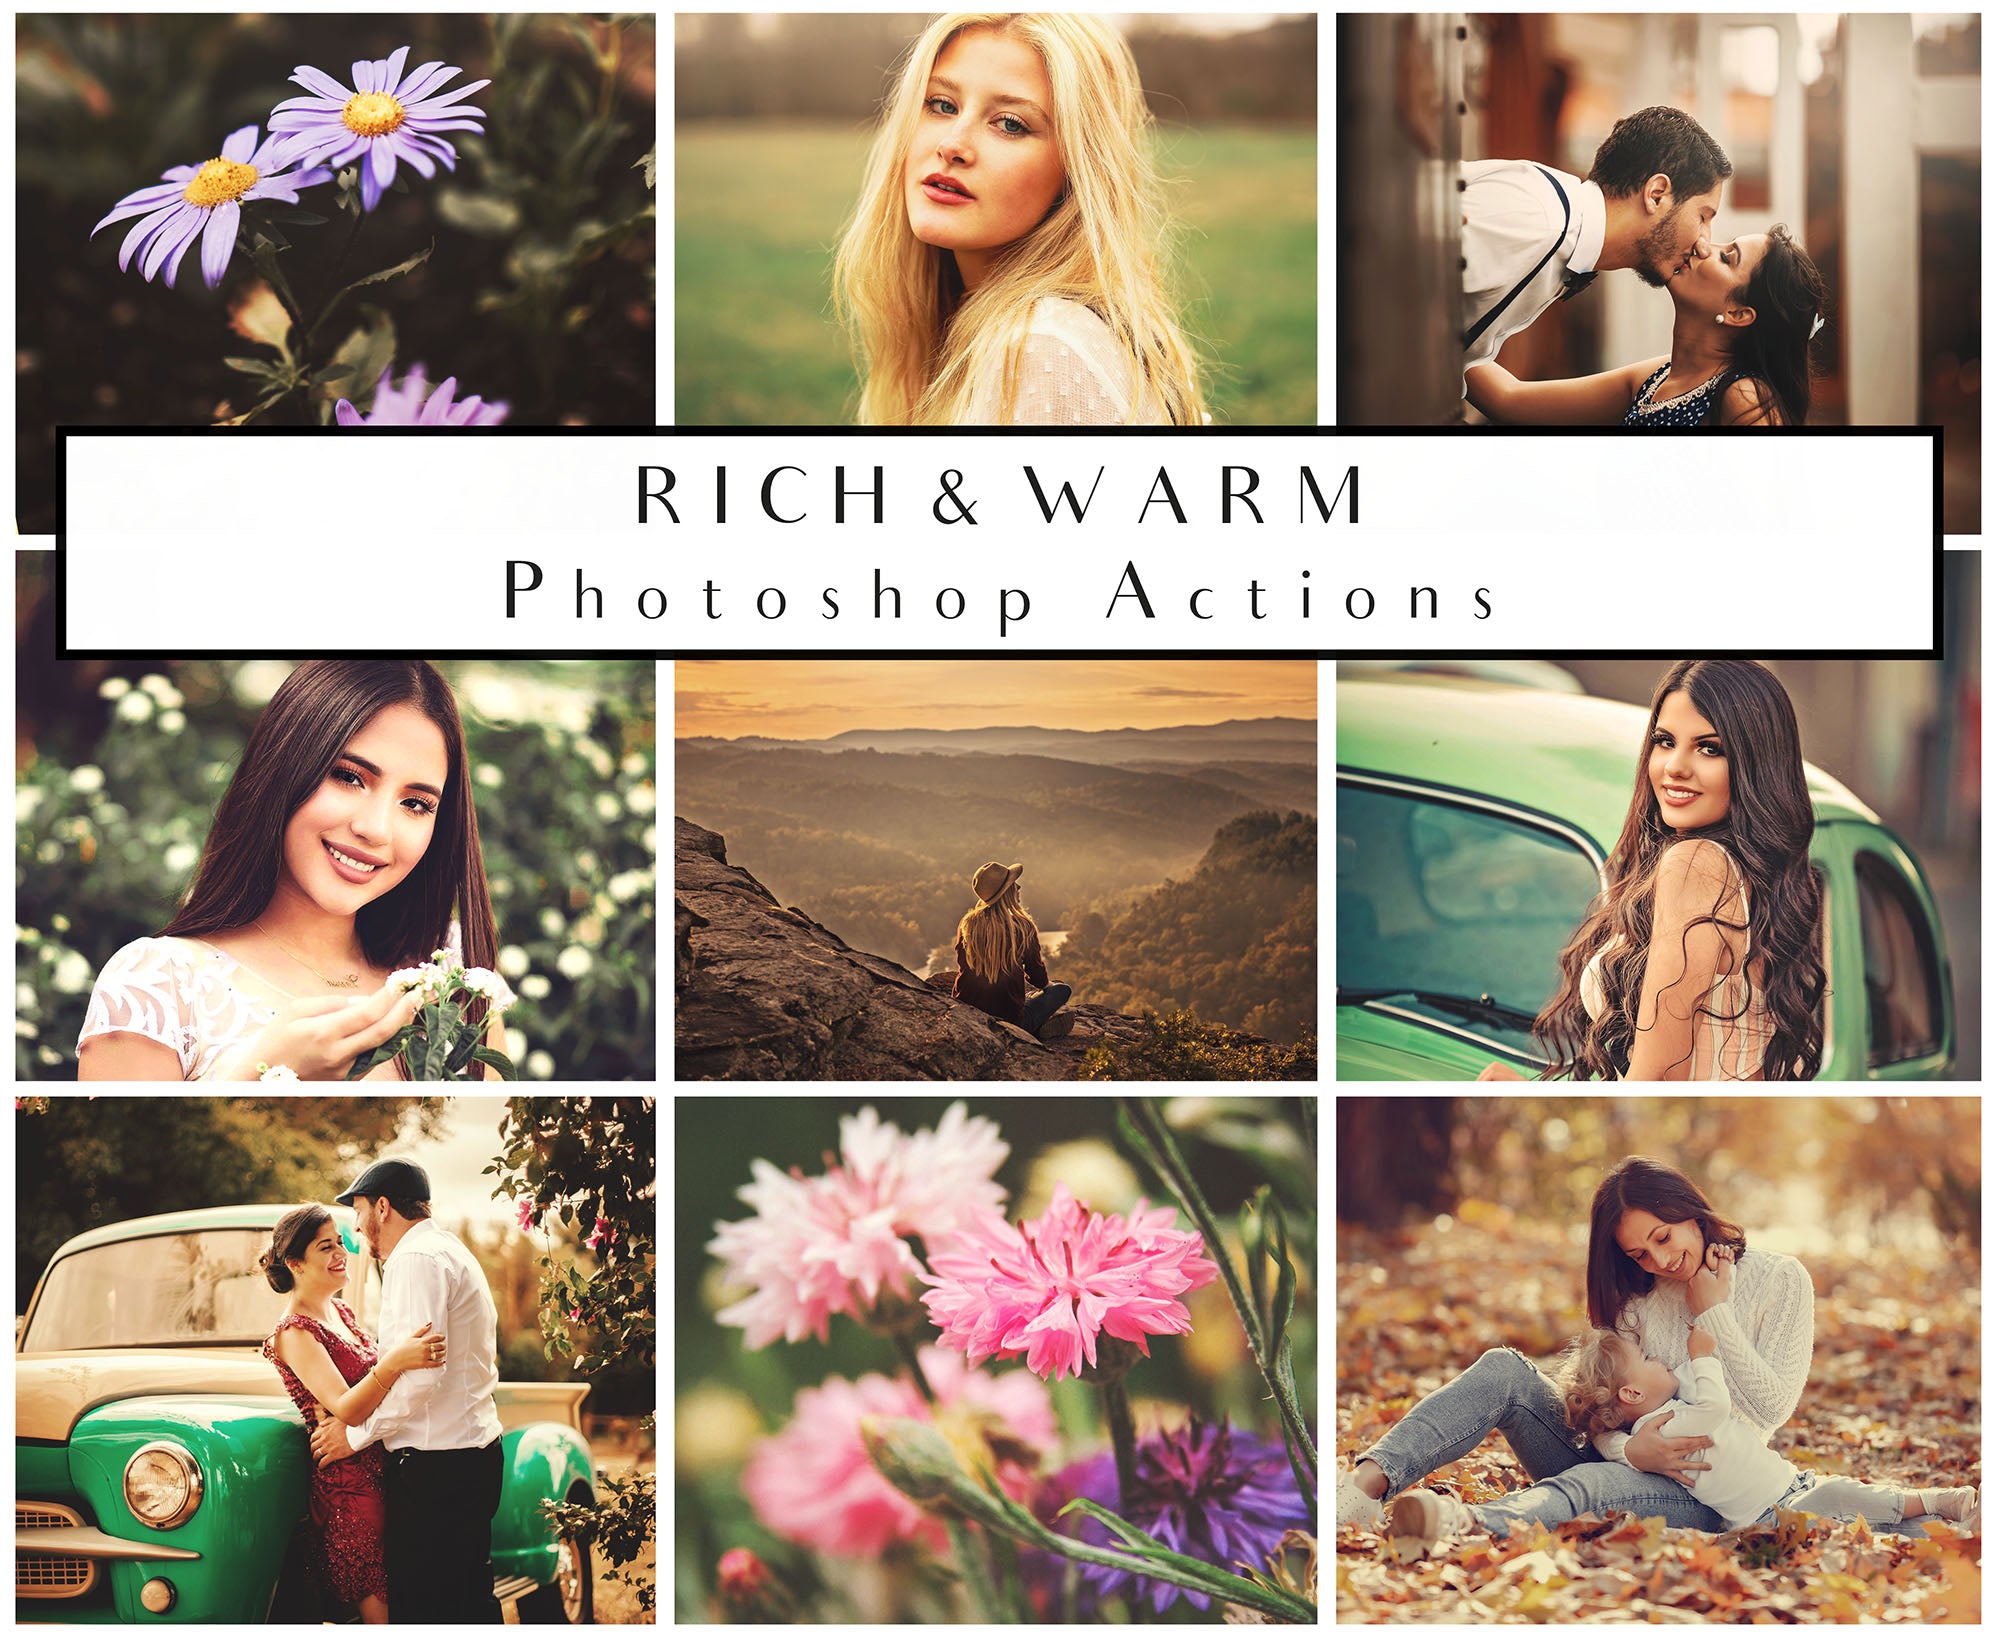 Photoshop Actions for Photography Edits. PS atn files are compatible with all versions of PS CS6. Photoshop Actions for professional photographers, photo edits and Instagram influencers. Warm, Rich, Light, Matte. For Wedding, Newborn, Studio Photography. By ATP Textures